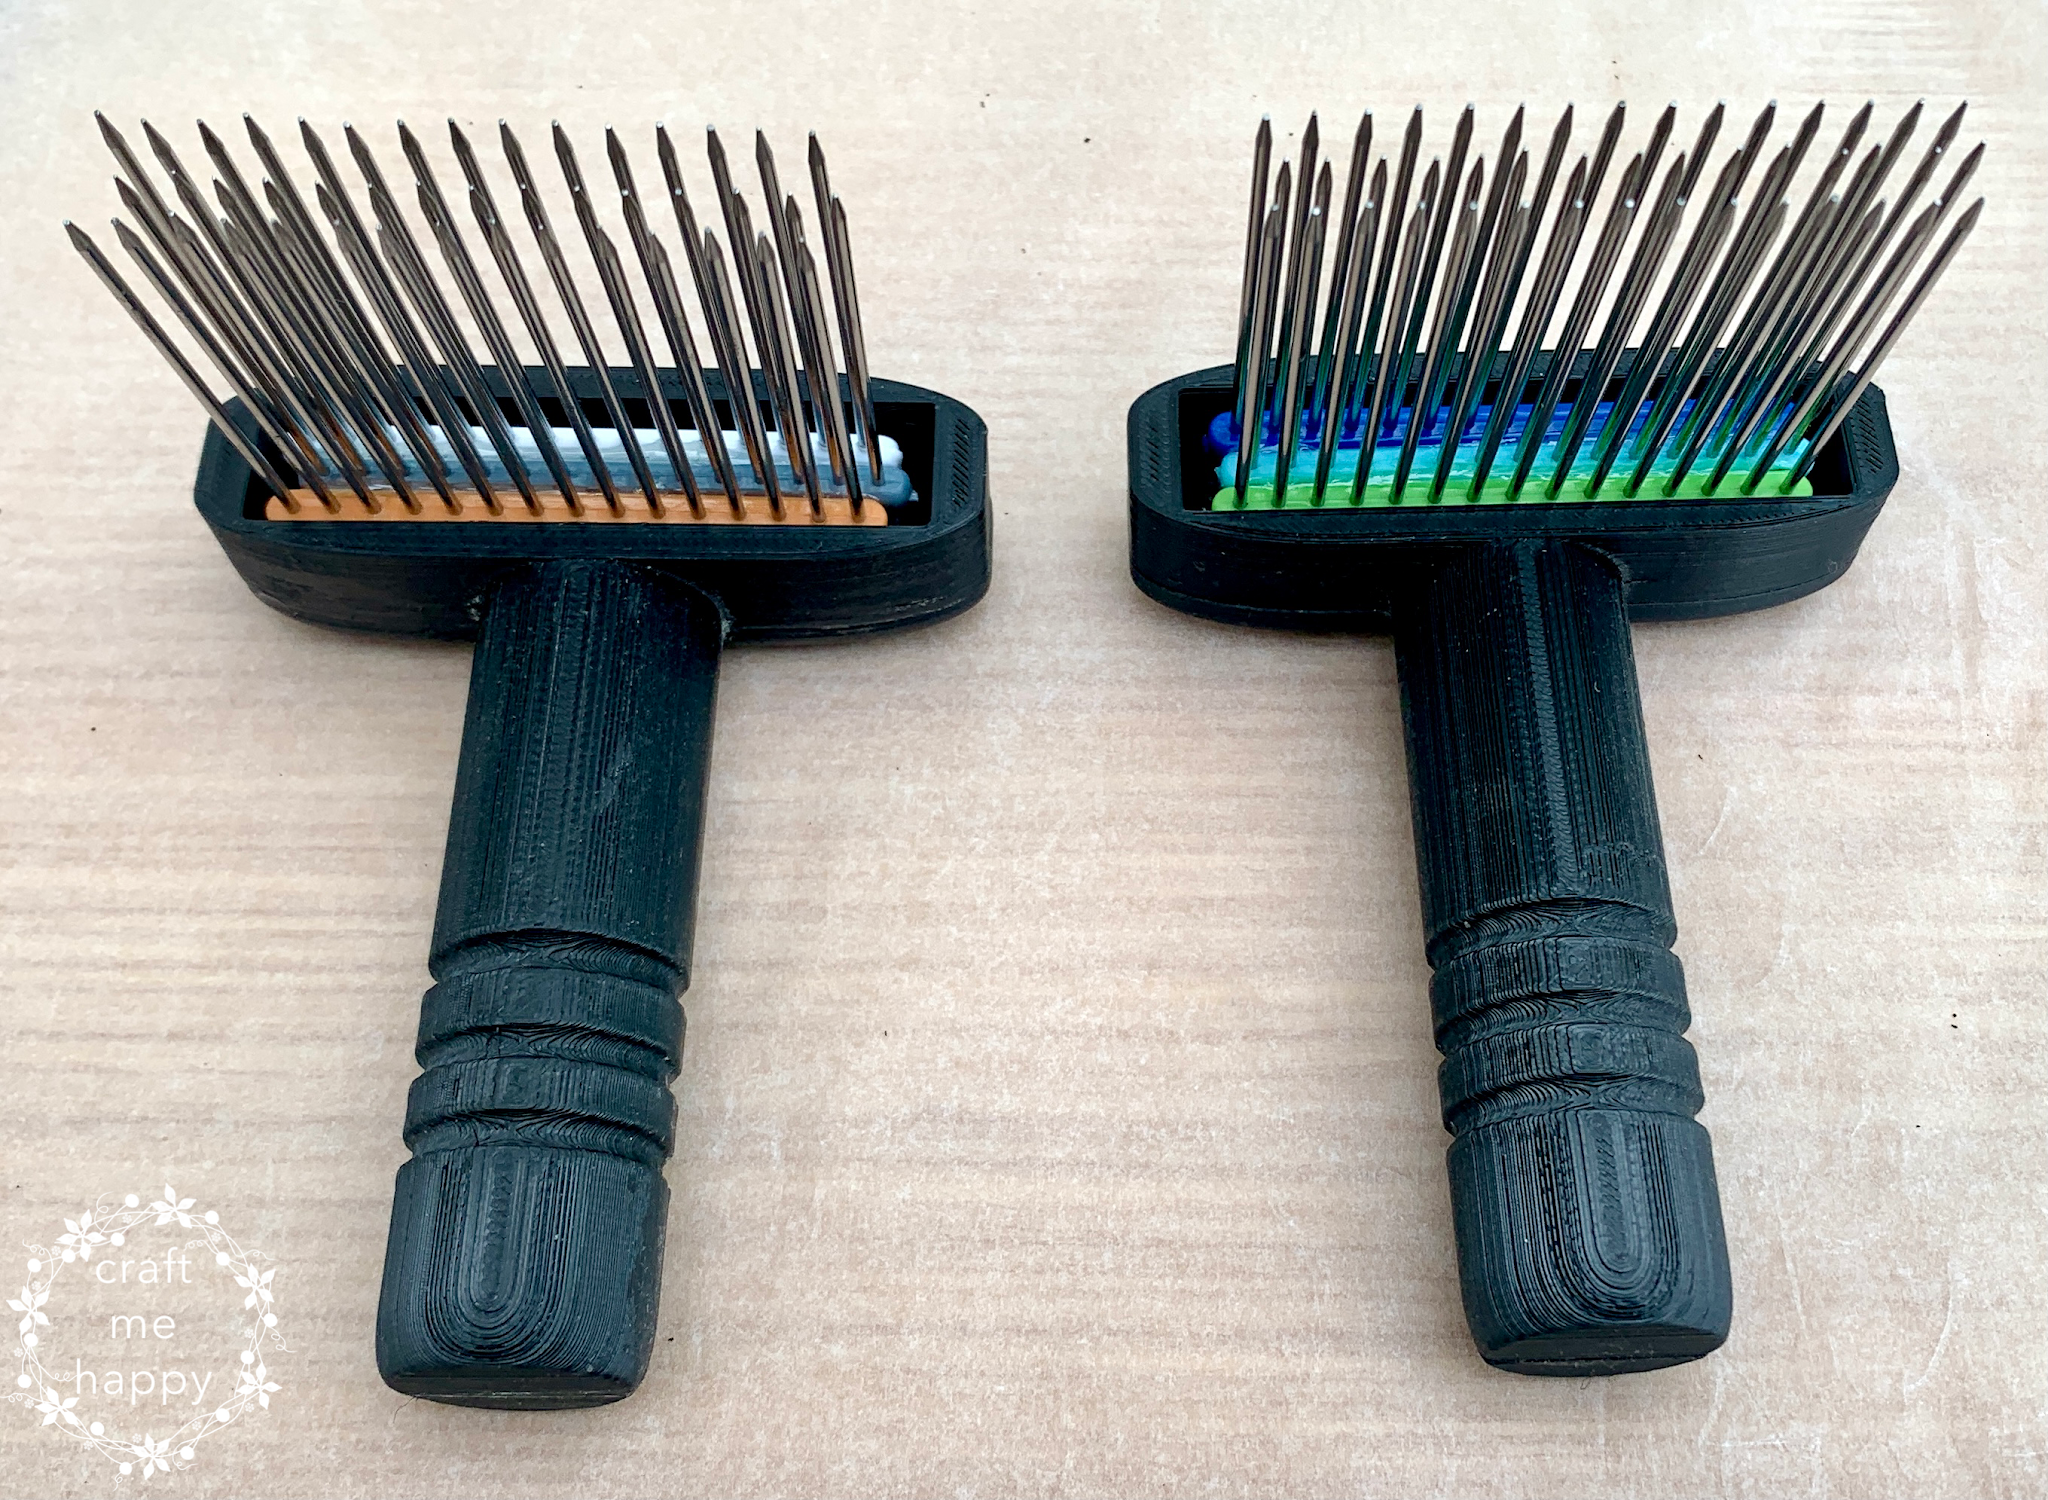 DIY 3D printed mini wool combs made out of onion holders 